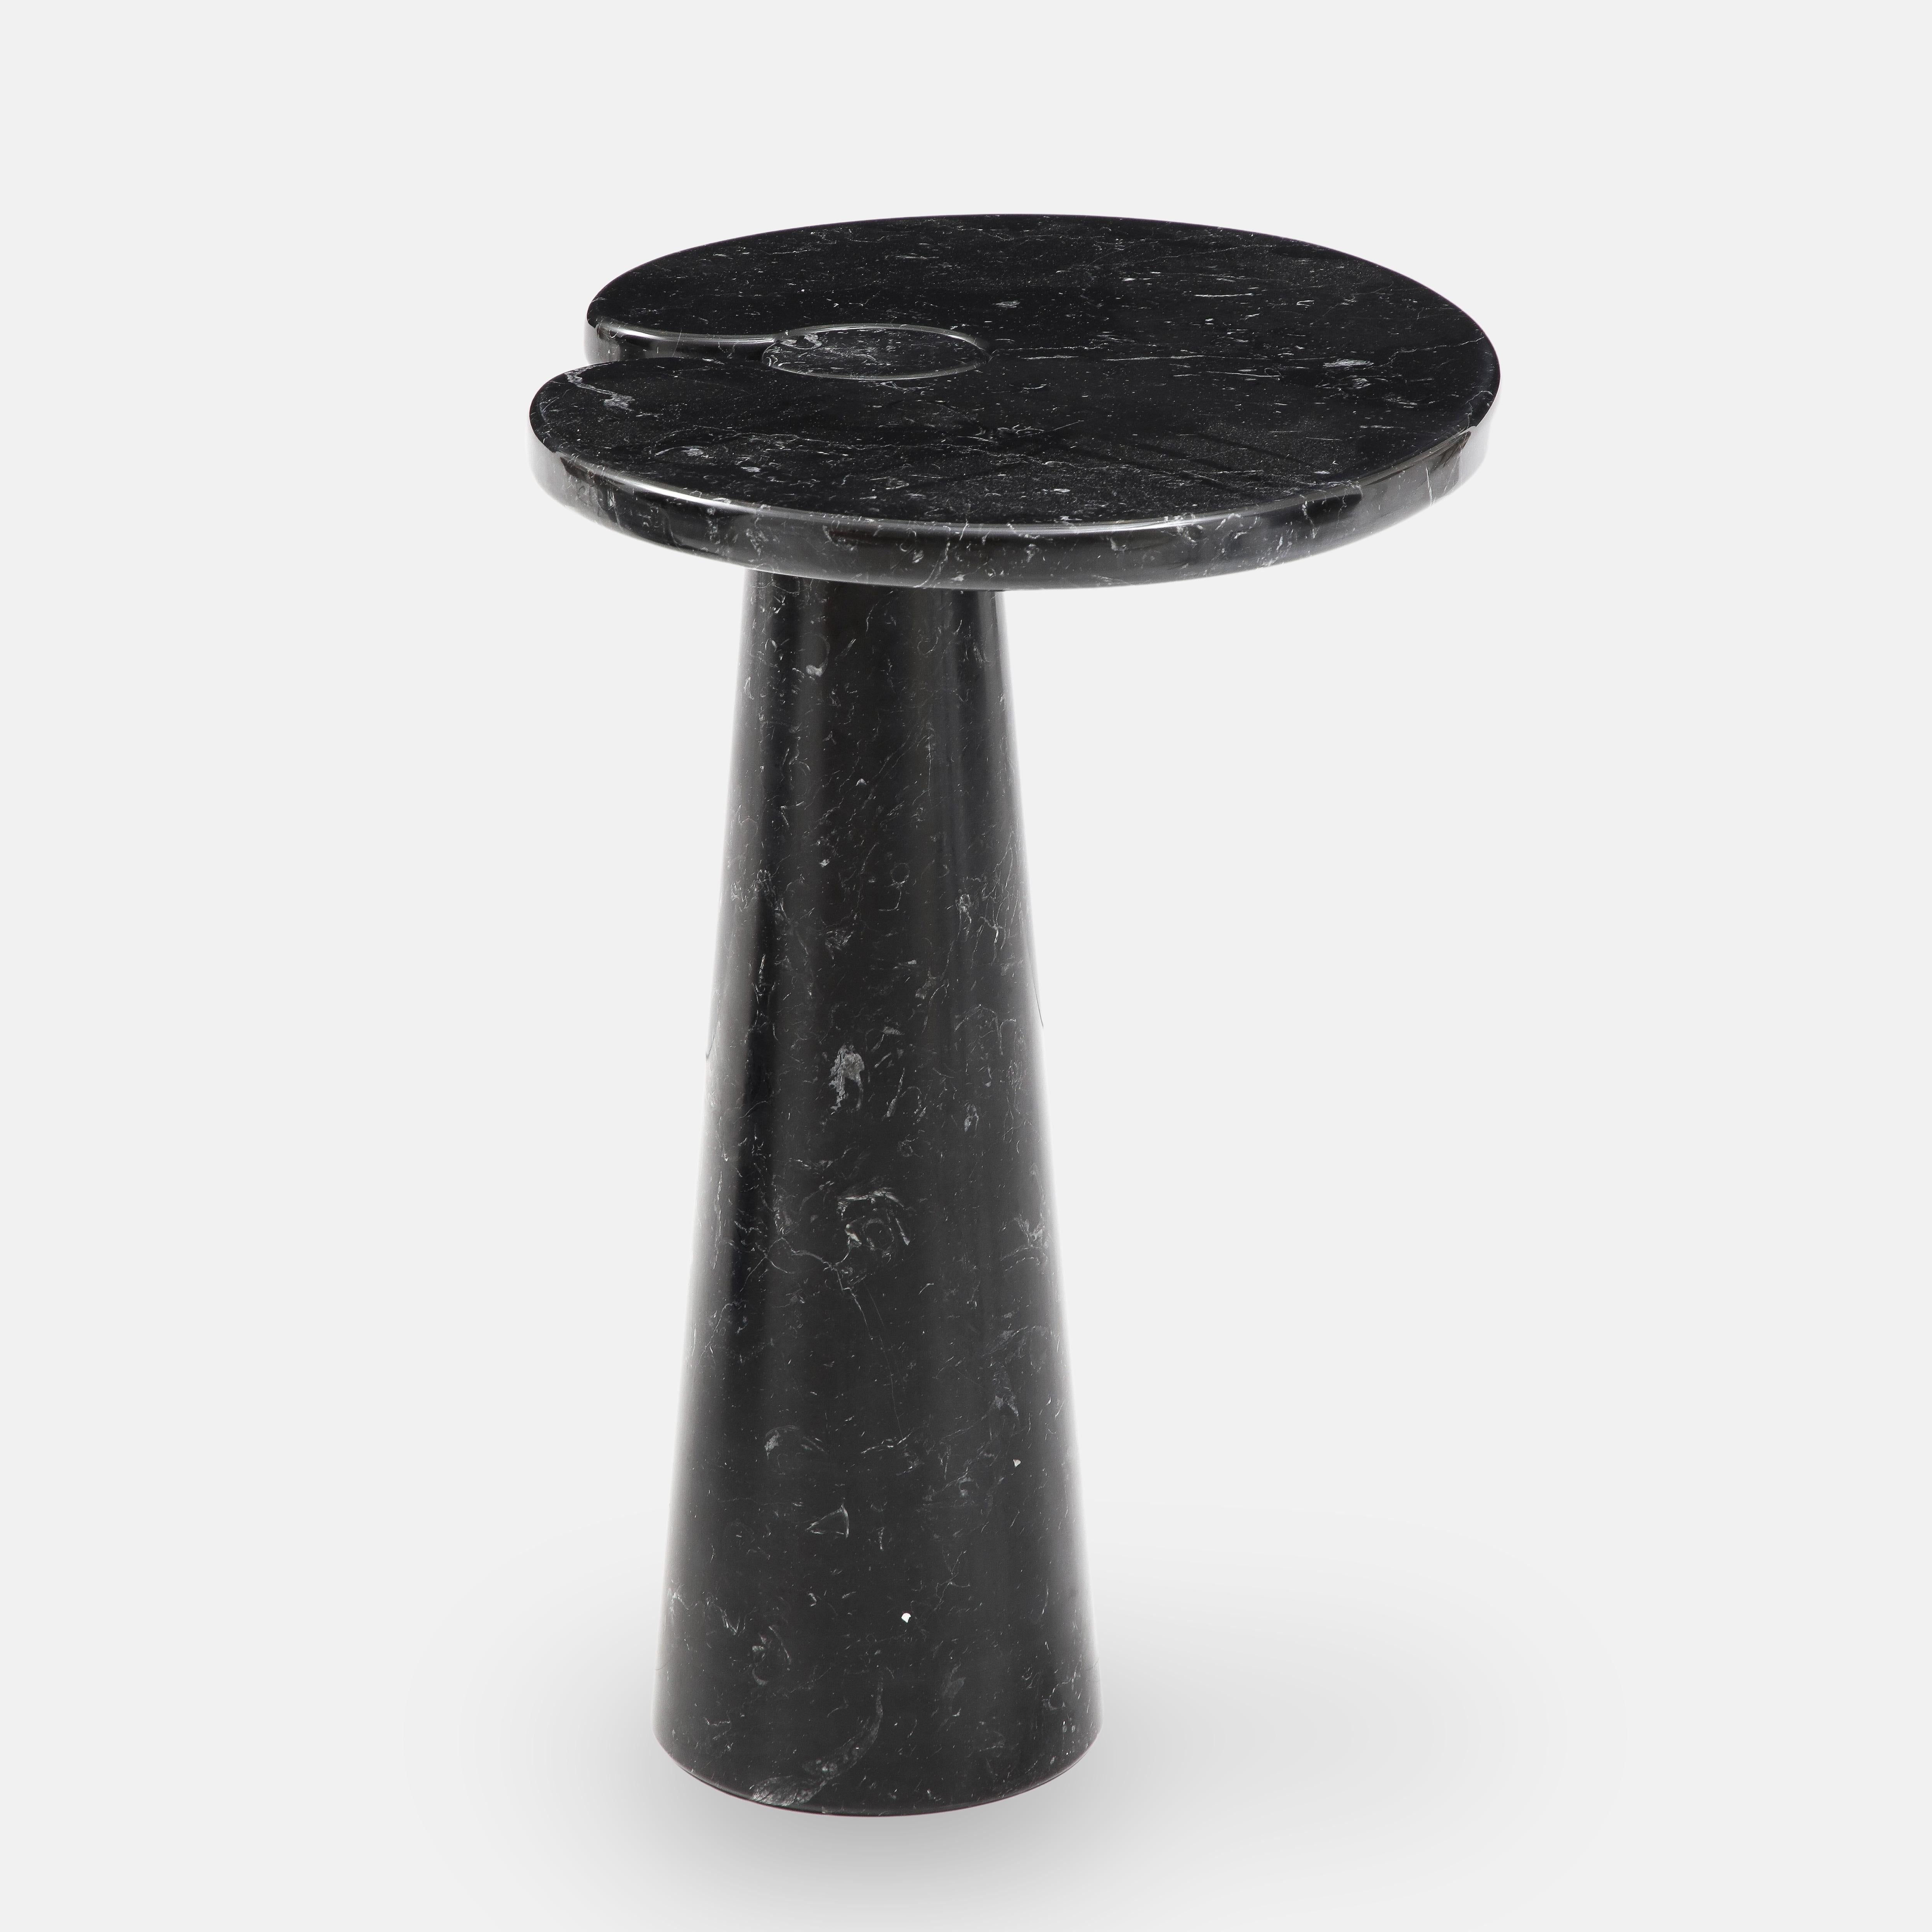 Polished Angelo Mangiarotti Pair of Nero Marquina Eros Marble Tall Side Tables, 1971 For Sale